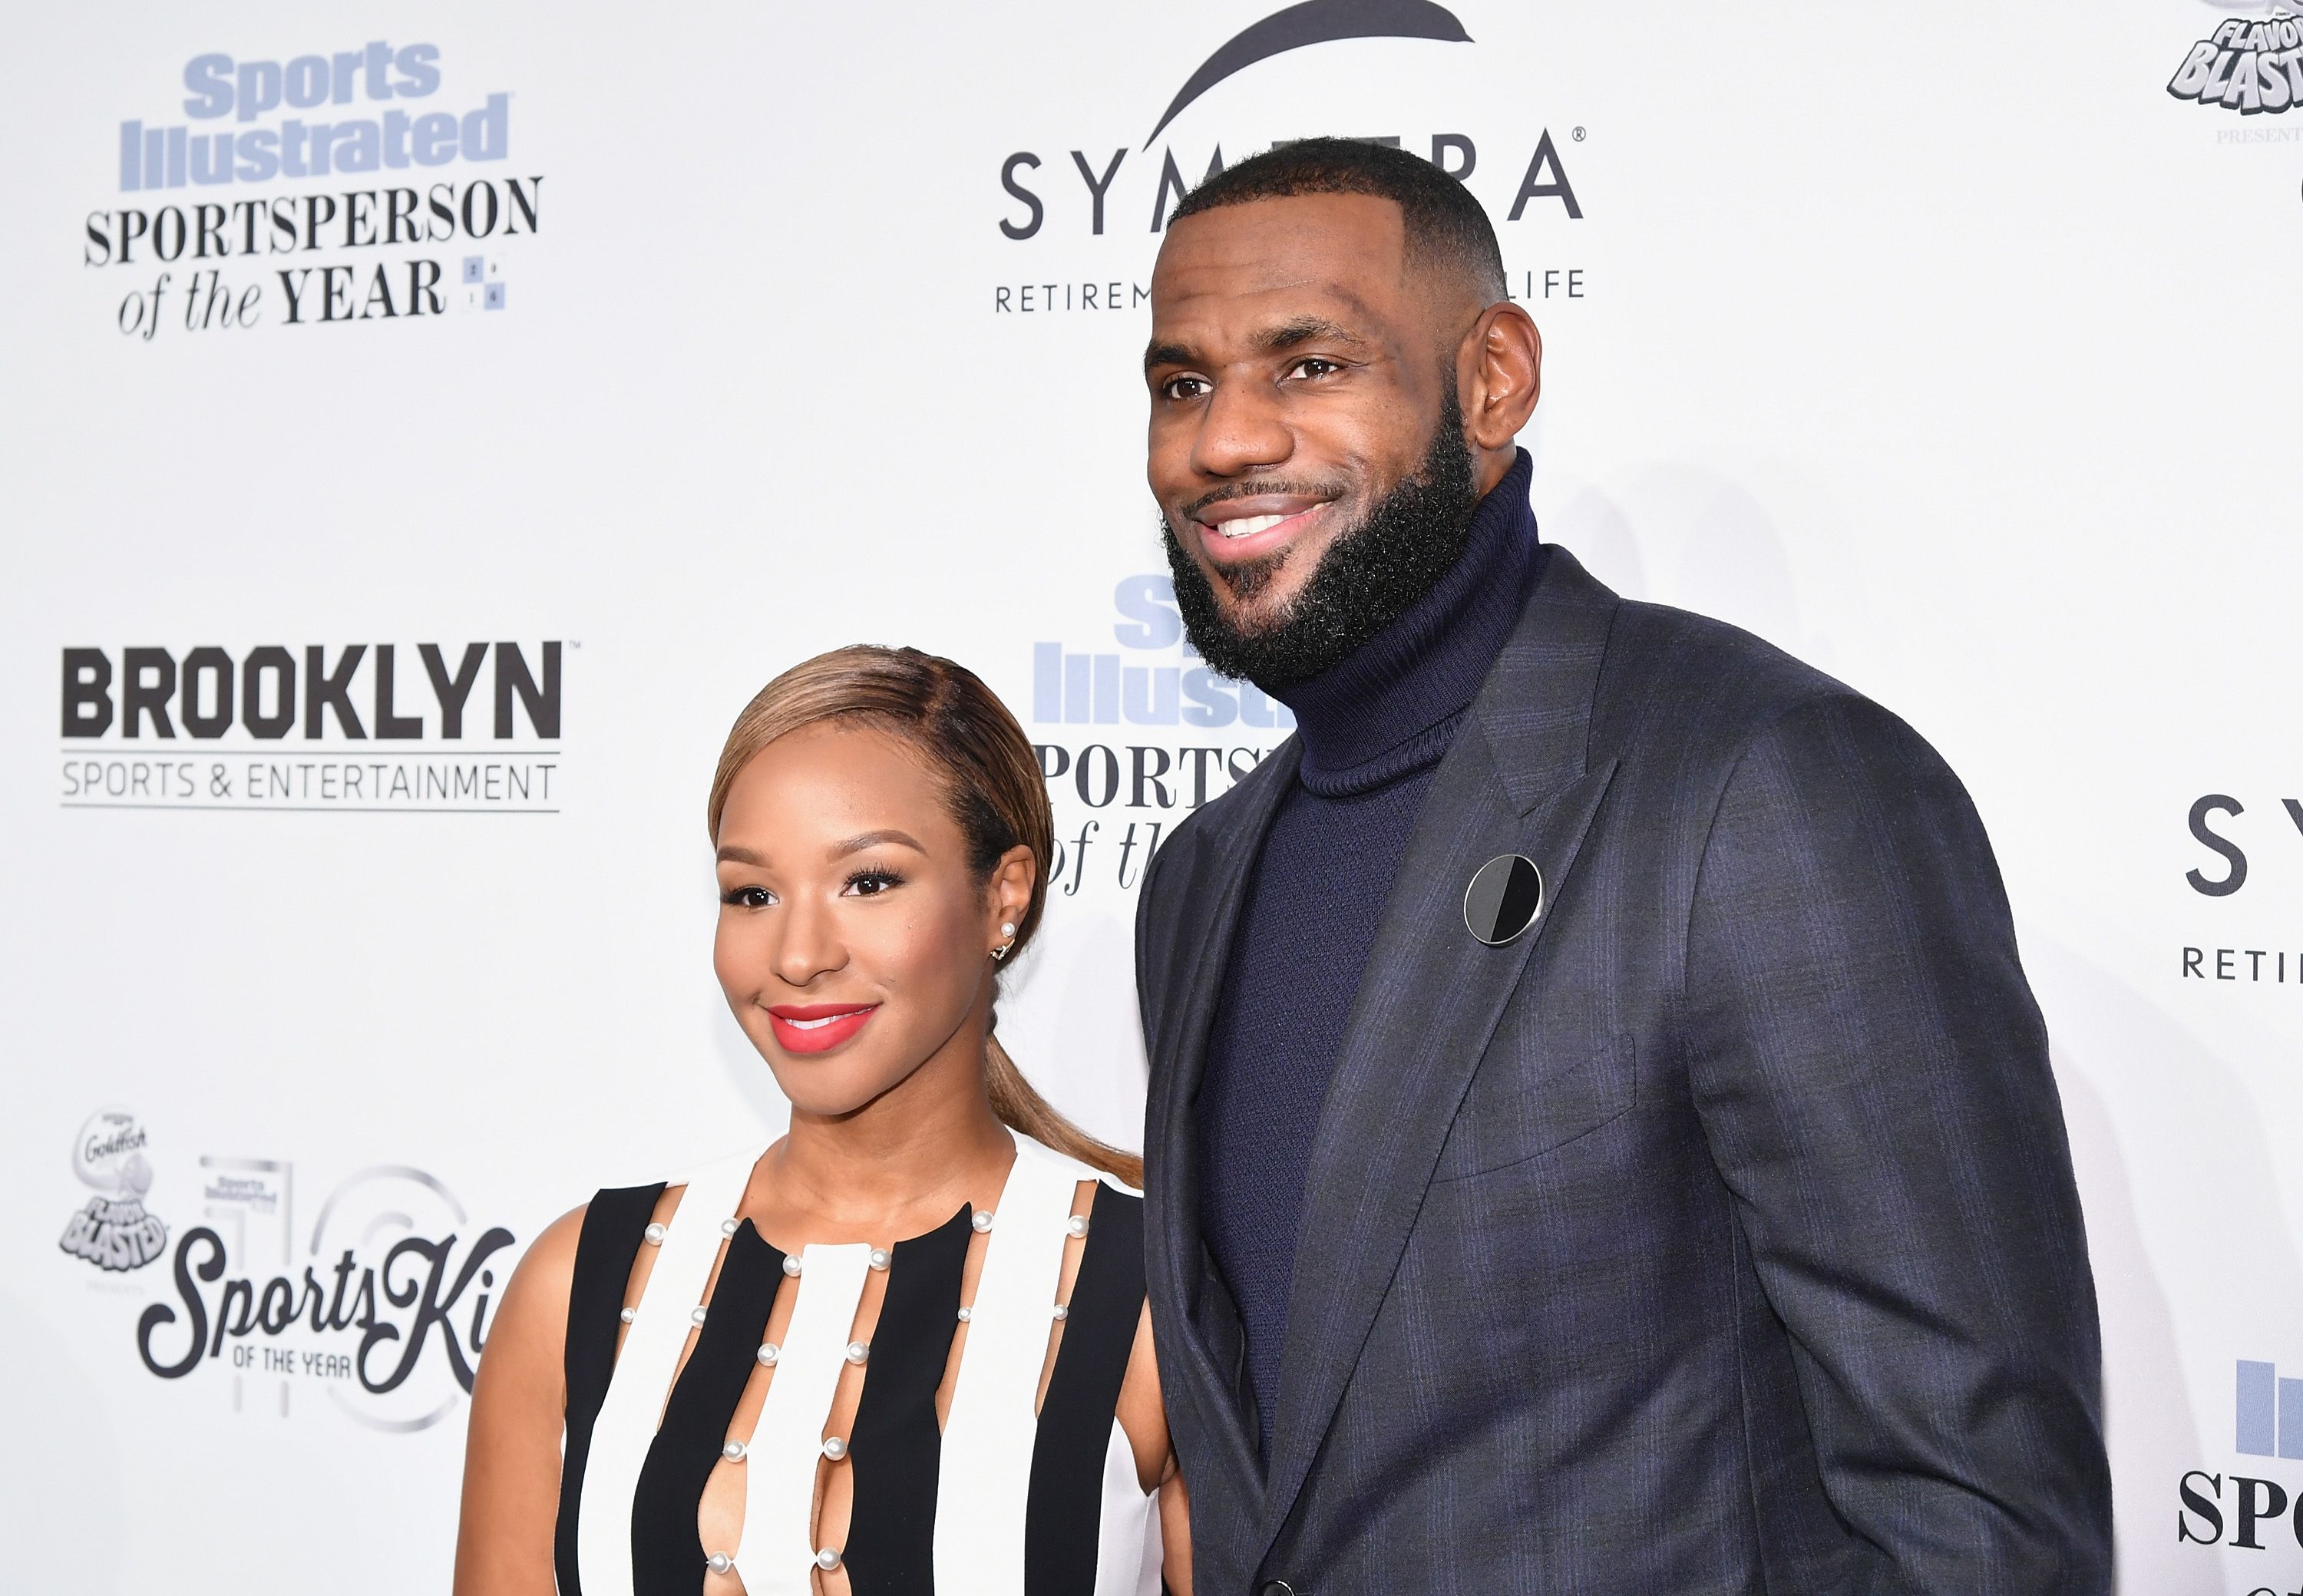 Savannah Brinson and LeBron James at the Sports Illustrated Sportsperson of the Year Ceremony 2016 on December 12, 2016 in New York City. | Source: Getty Images